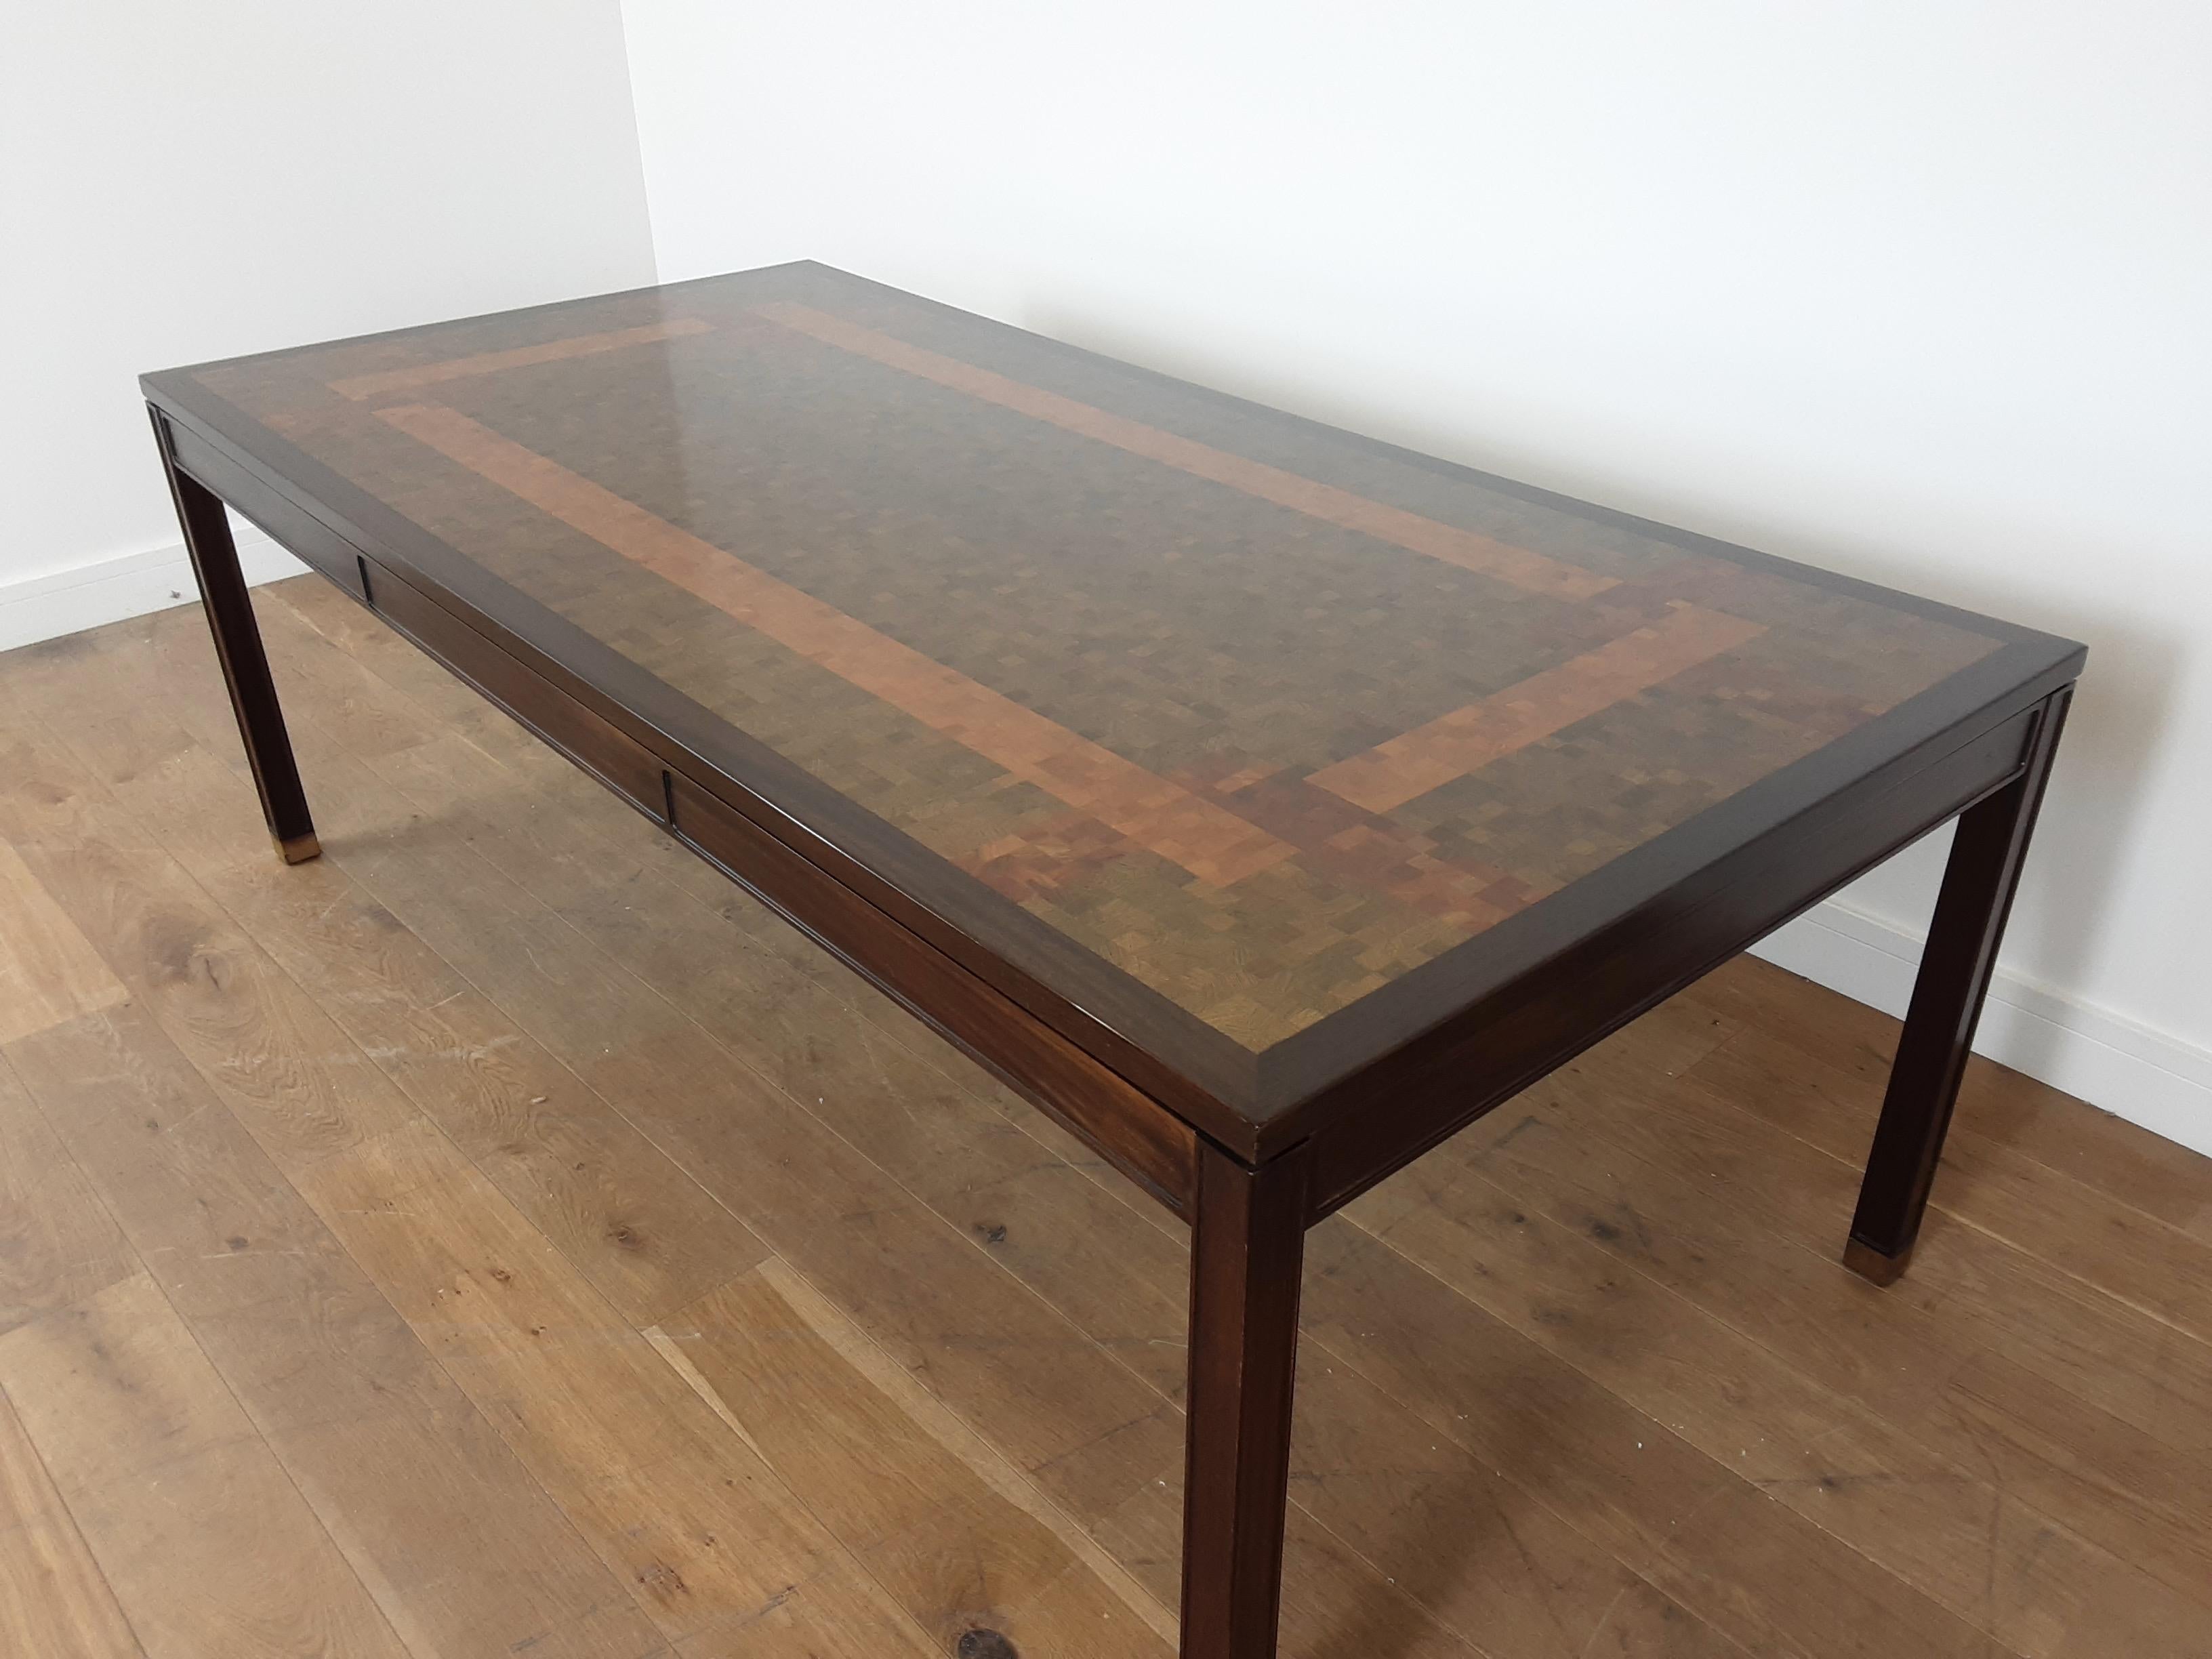 Fruitwood Large Midcentury Dining Table Designed by Gorm Lindum with Mosaic Design For Sale